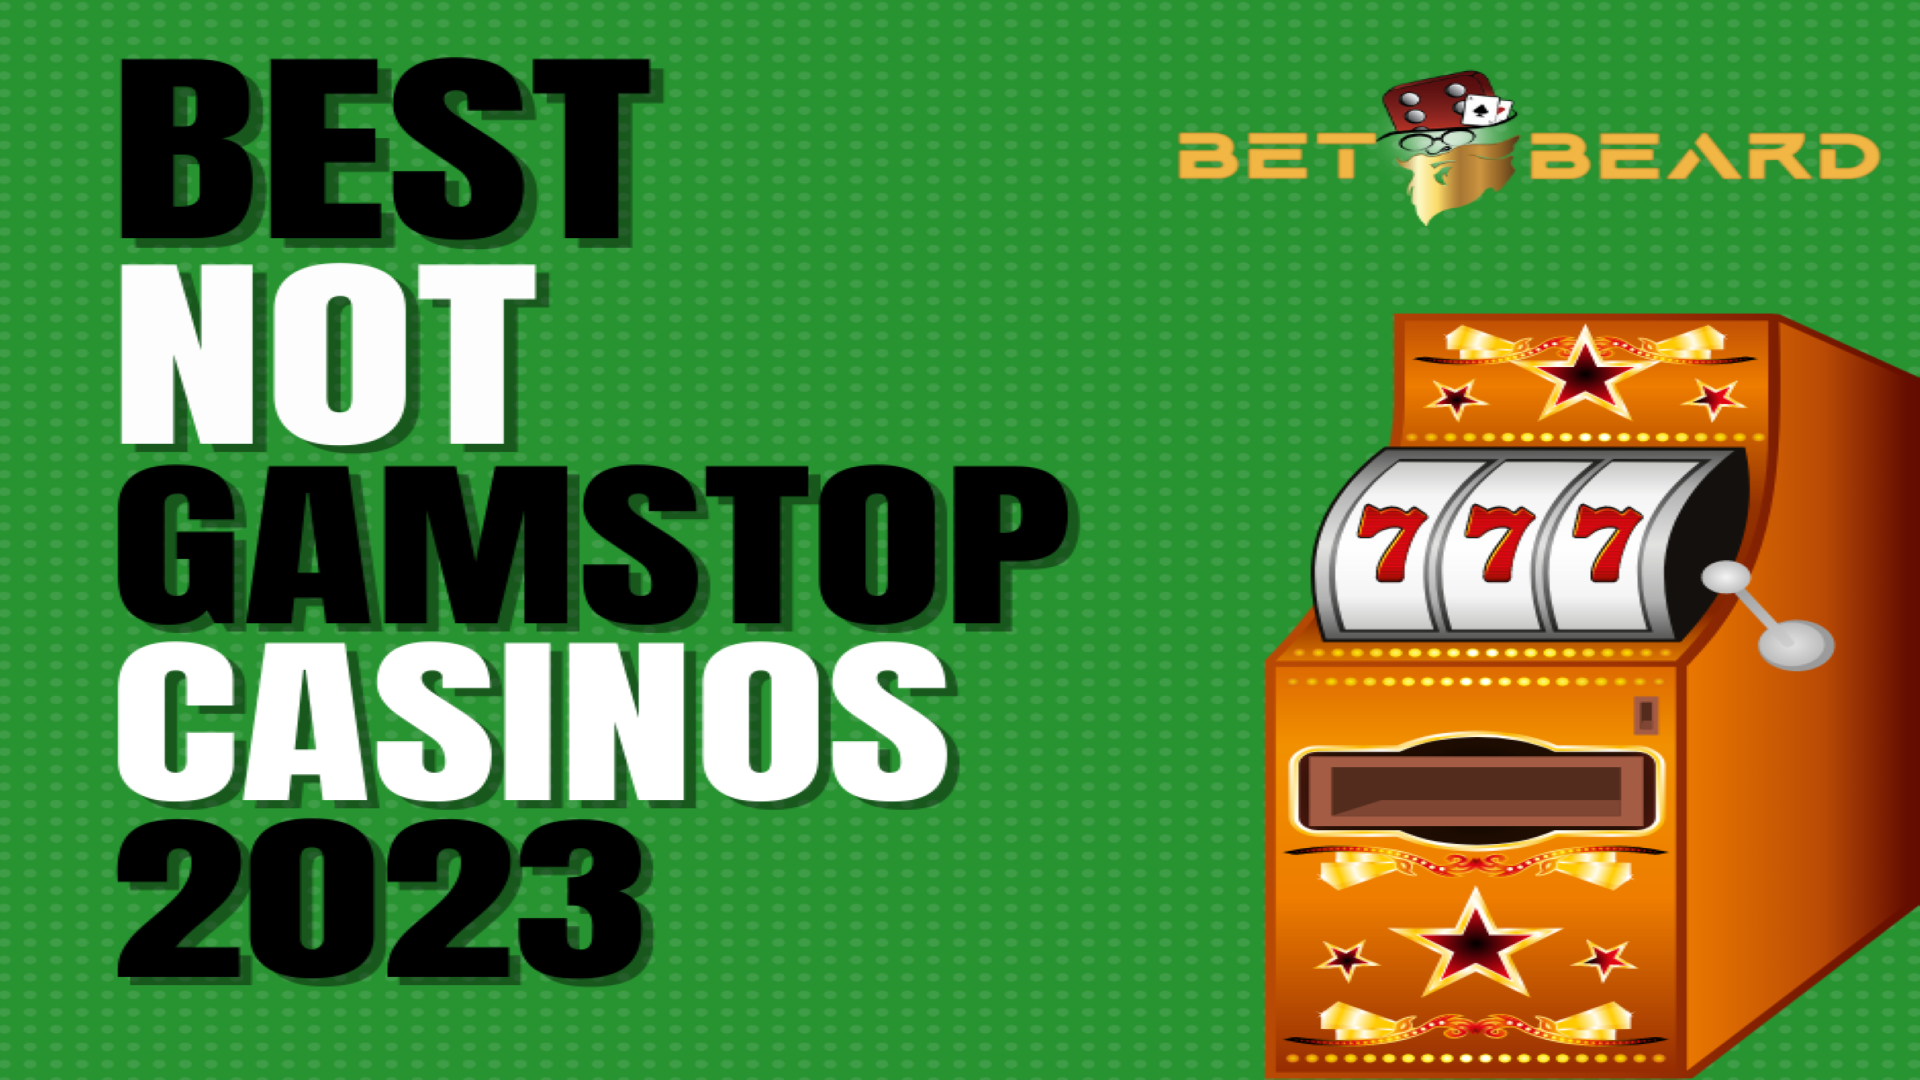 50 Reasons to uk casino not on gamstop in 2021